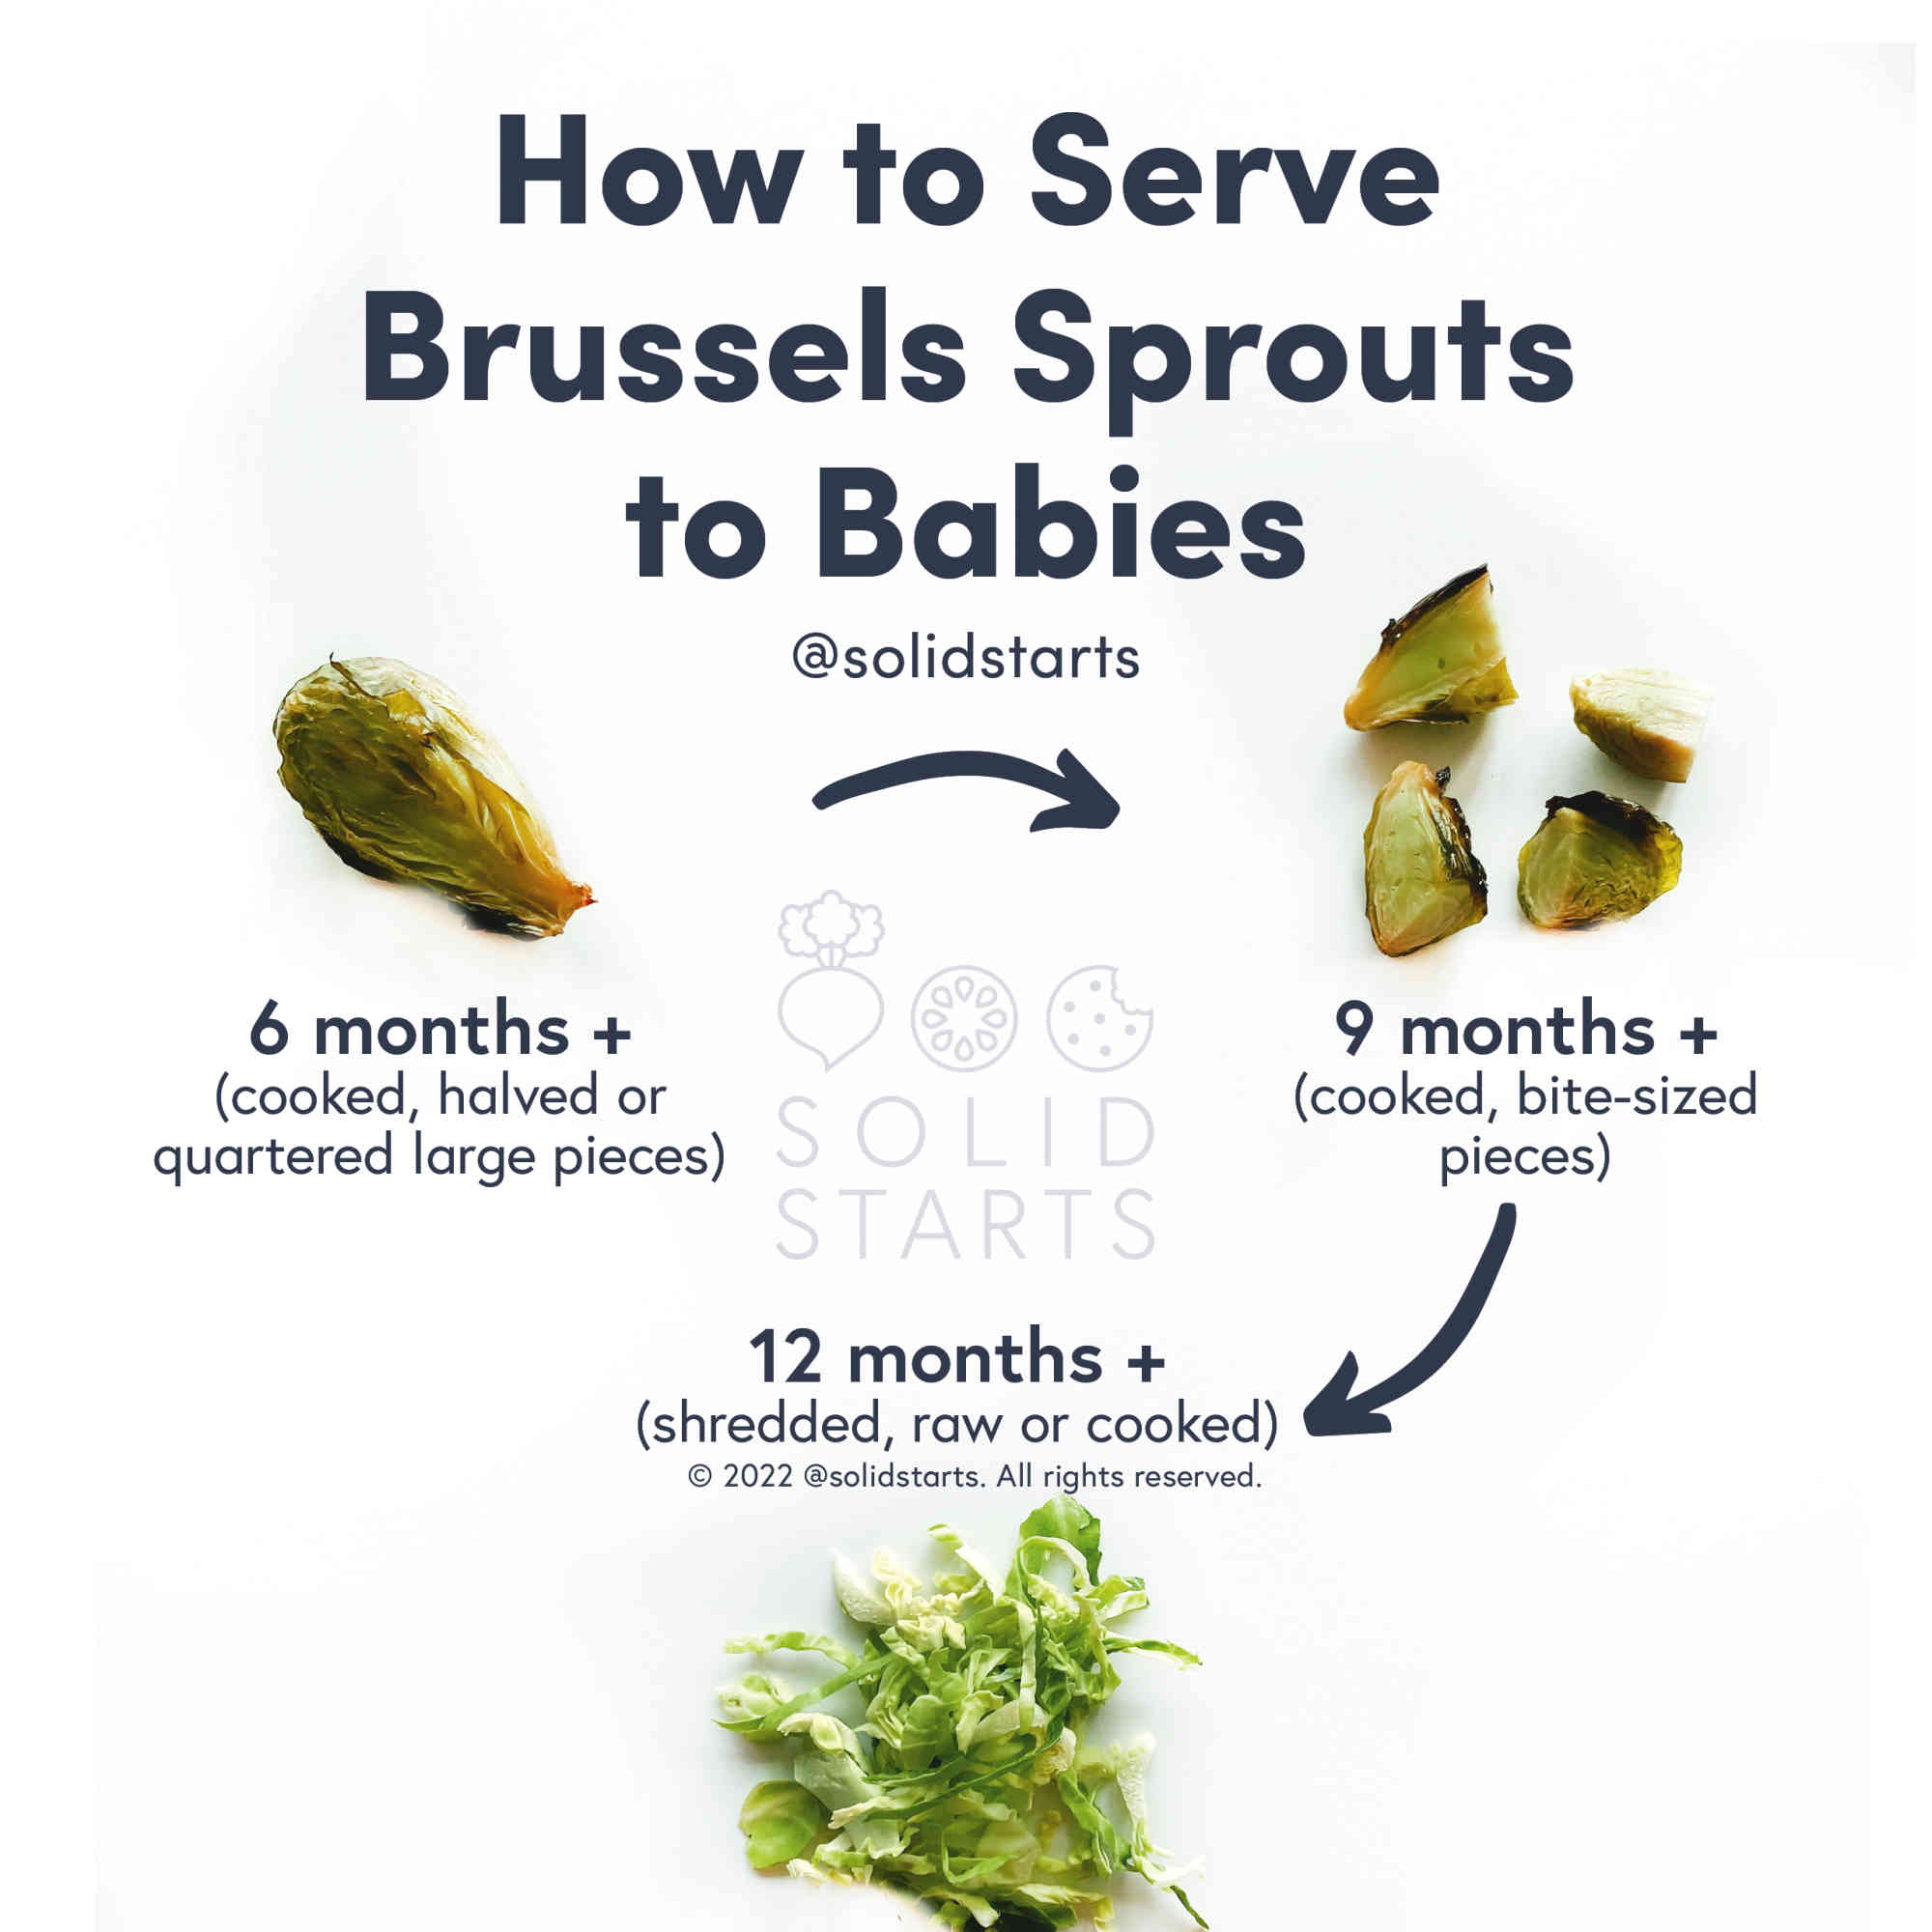 How to Serve Brussels Sprouts to Babies